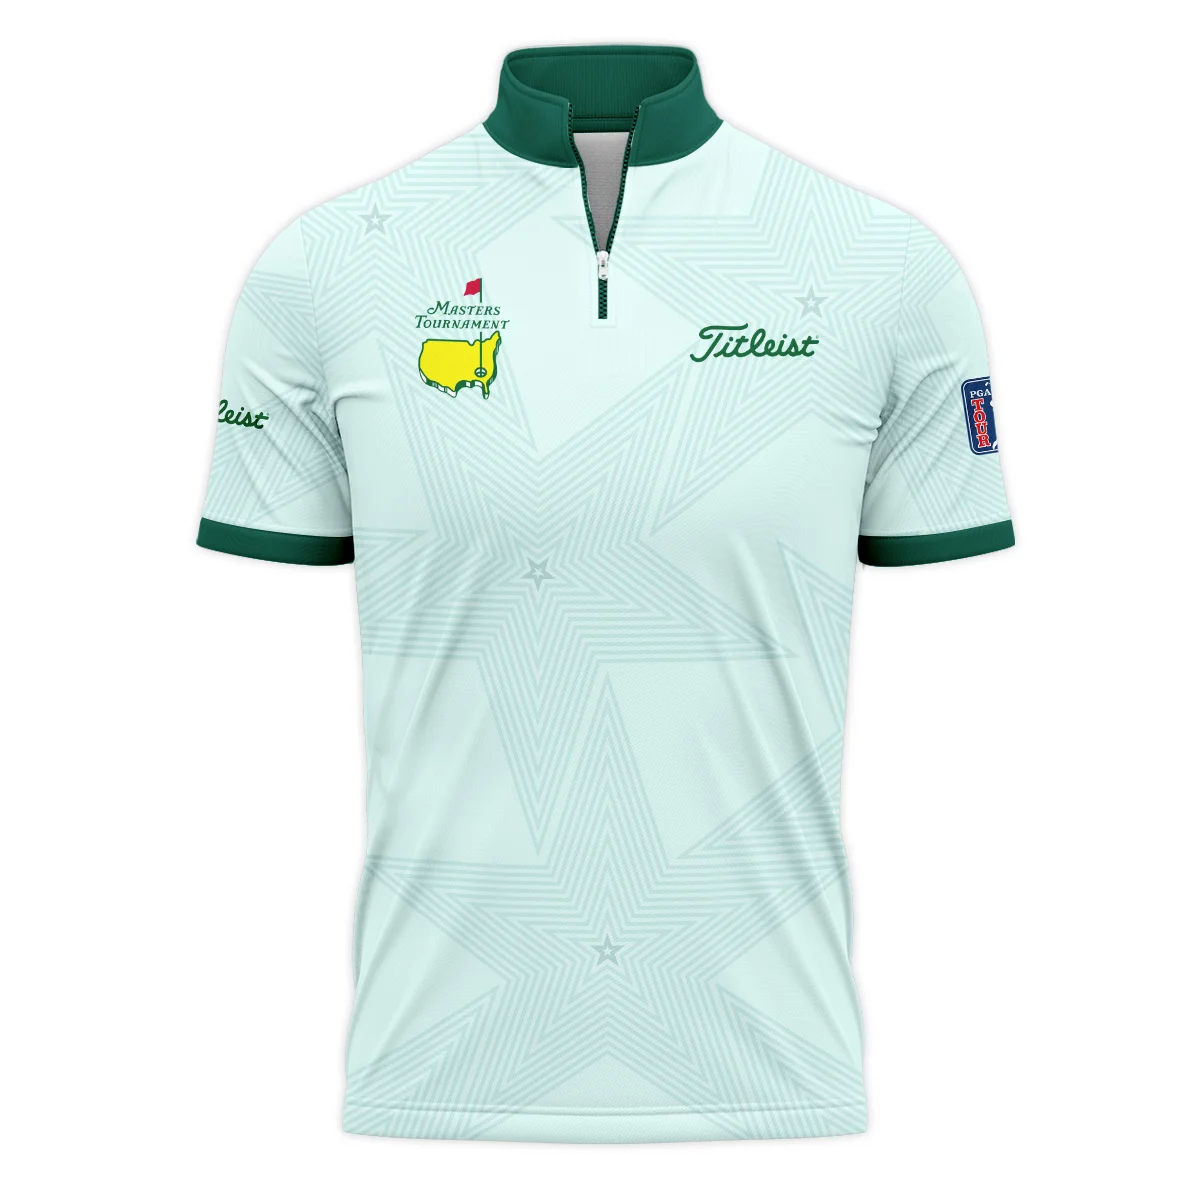 Golf Love Star Light Green Mix Masters Tournament Titlest Polo Shirt Style Classic